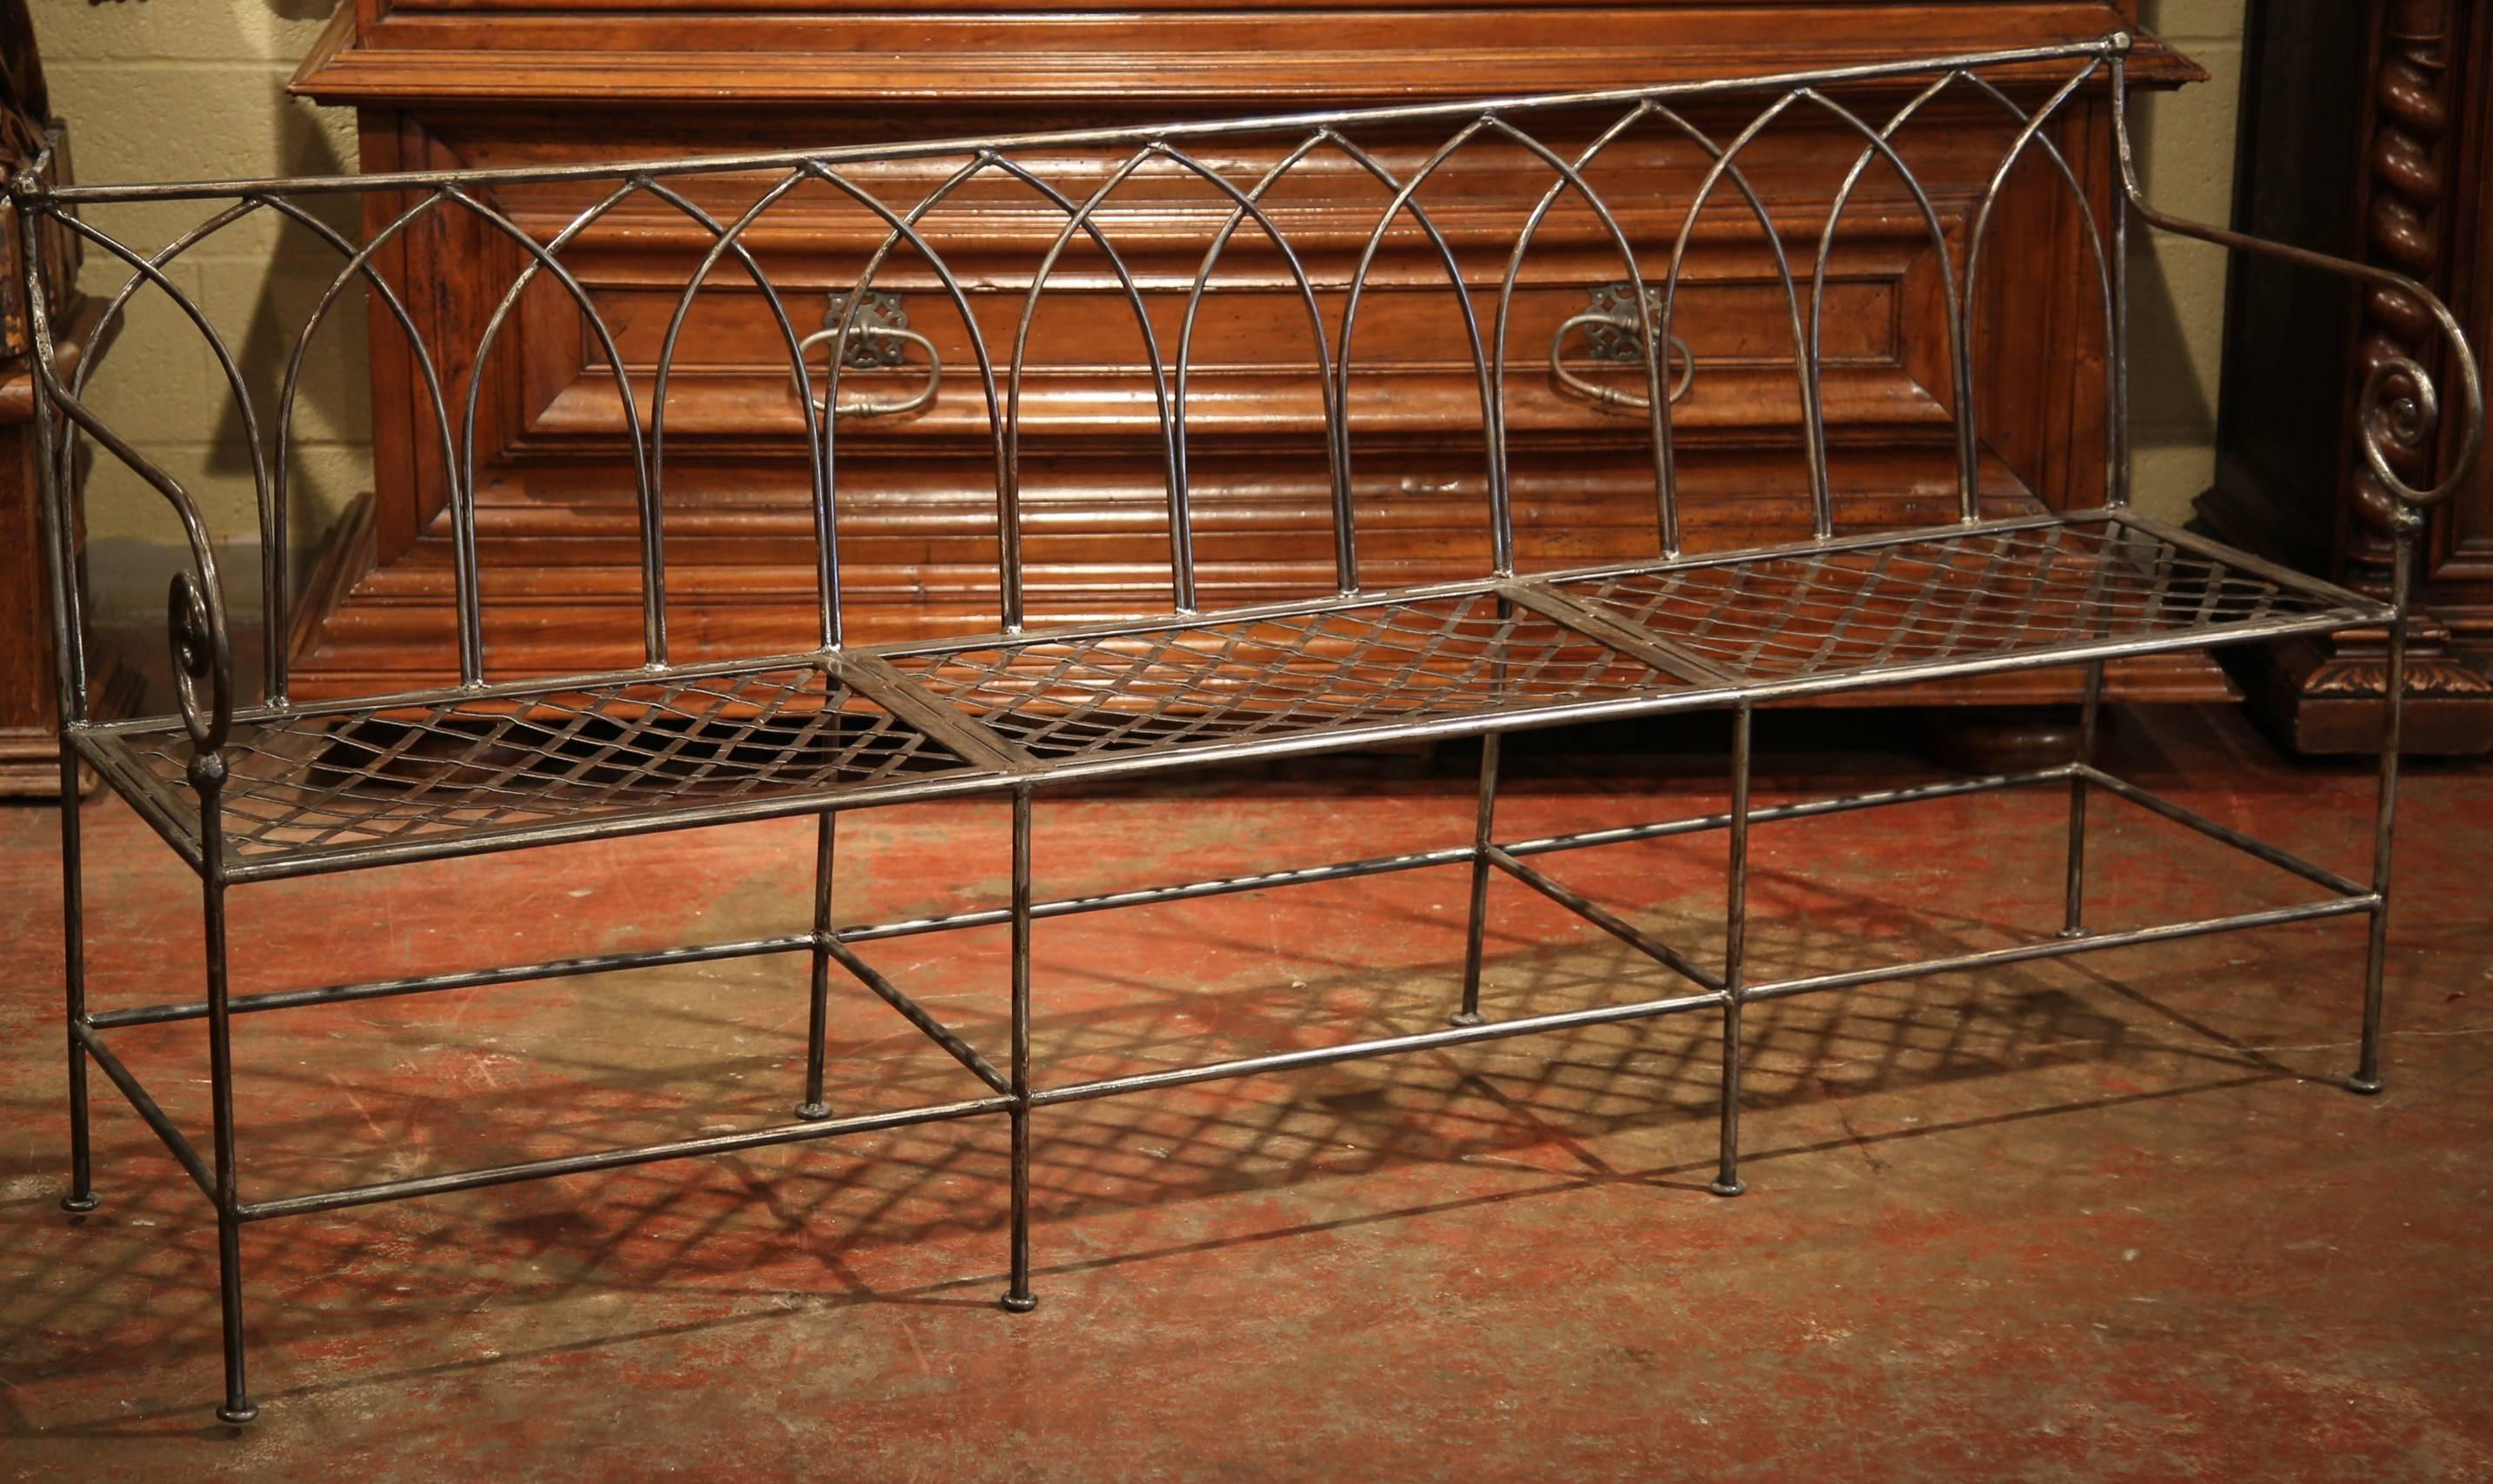 Add extra seating to a mudroom or covered outdoors space with this nicely forged iron bench from France. The simple bench stands on eight straight legs embellished with a rectangular bottom stretcher. The bench with curved arms, features a weave